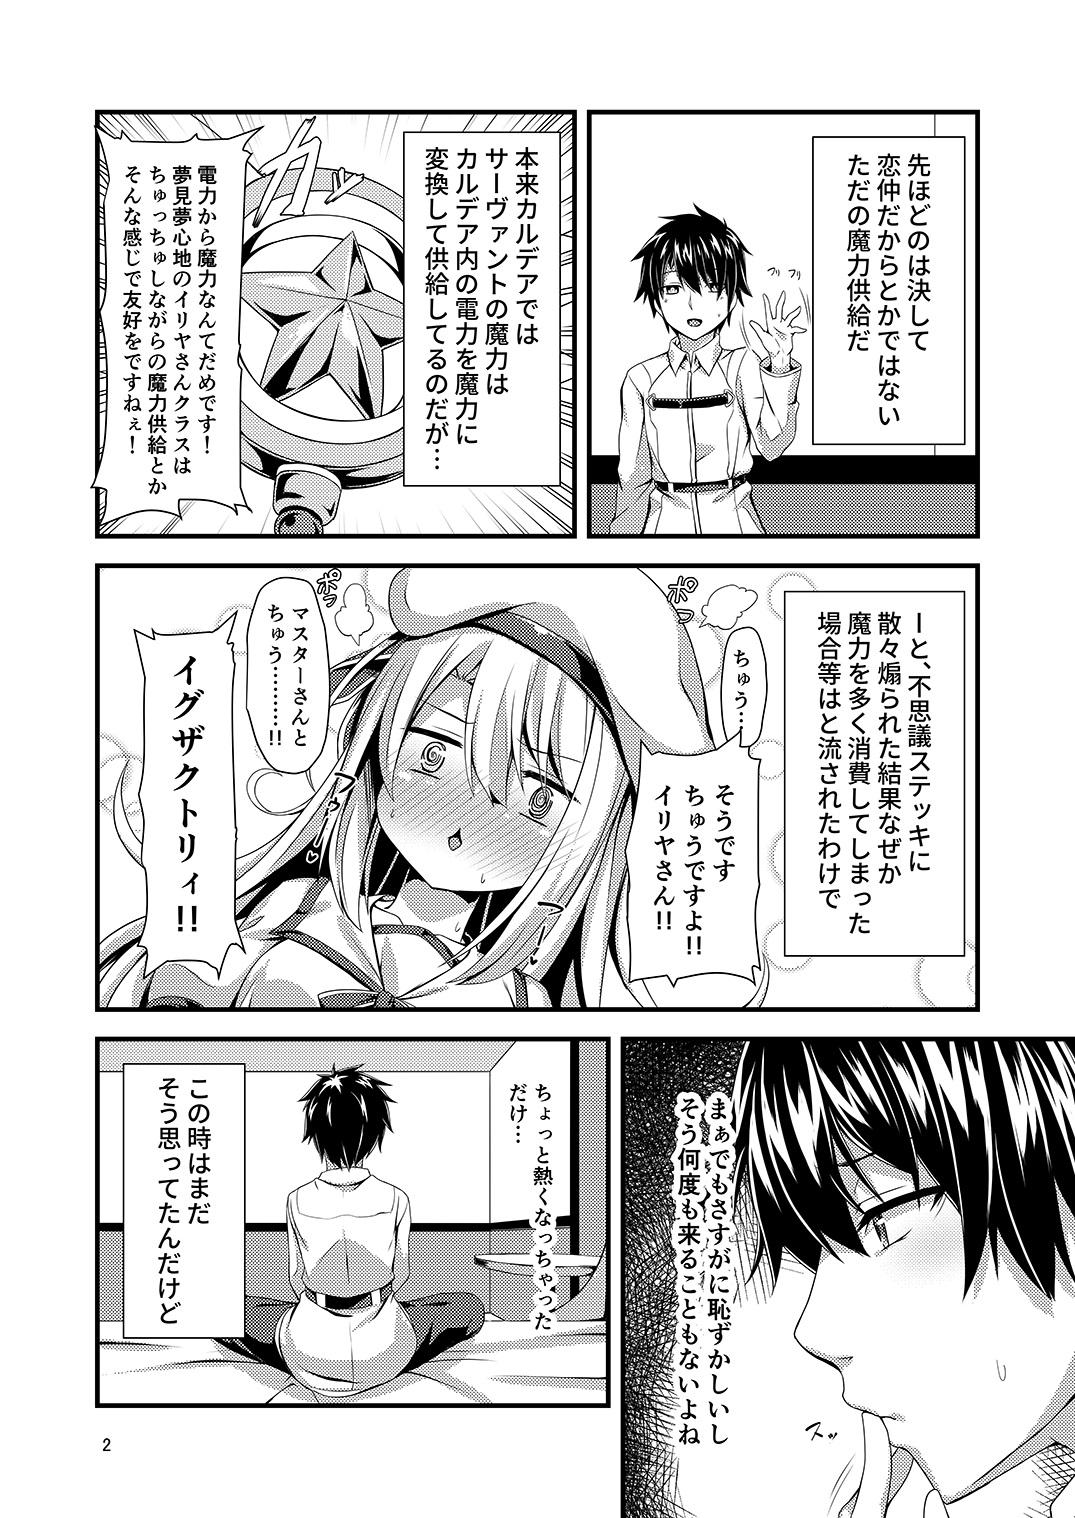 Anal Licking Ama Love Illya - Fate grand order Fate kaleid liner prisma illya 3way - Page 4